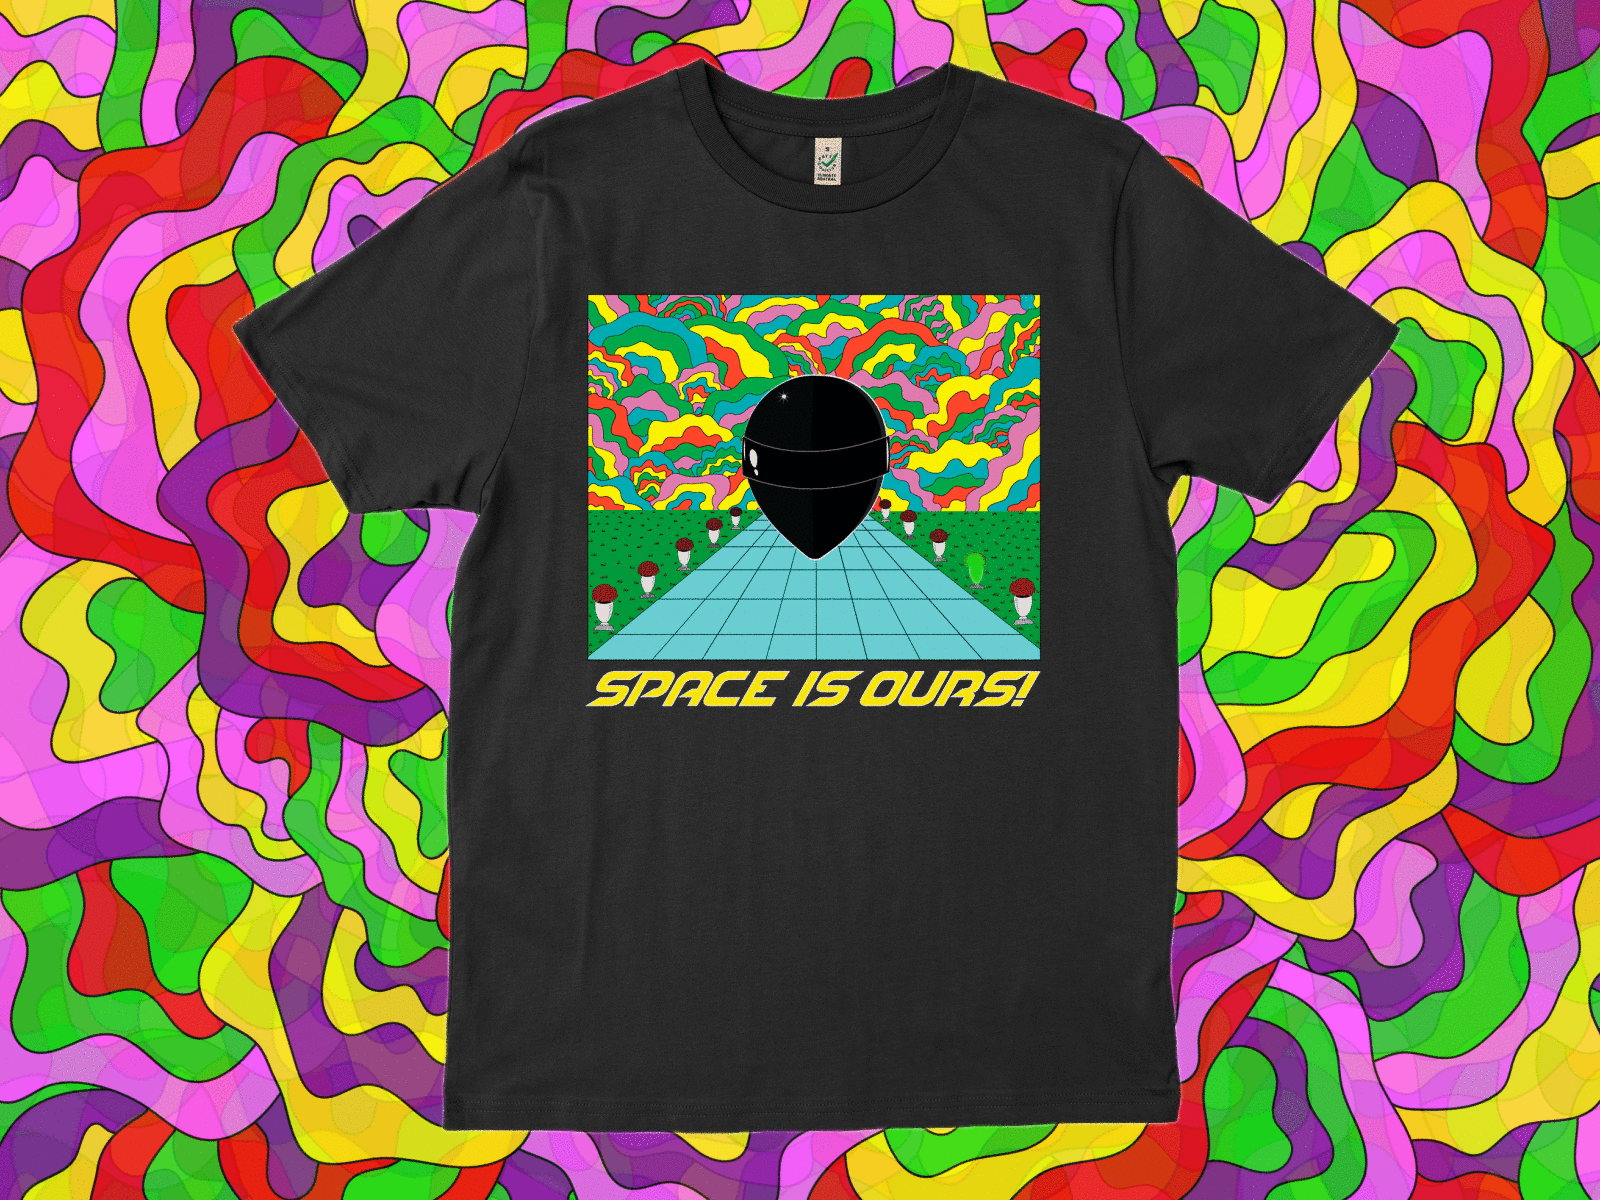 Space is ours! clothes disign everpress illustration merch merch design print psychedelic t shirt t shirt design